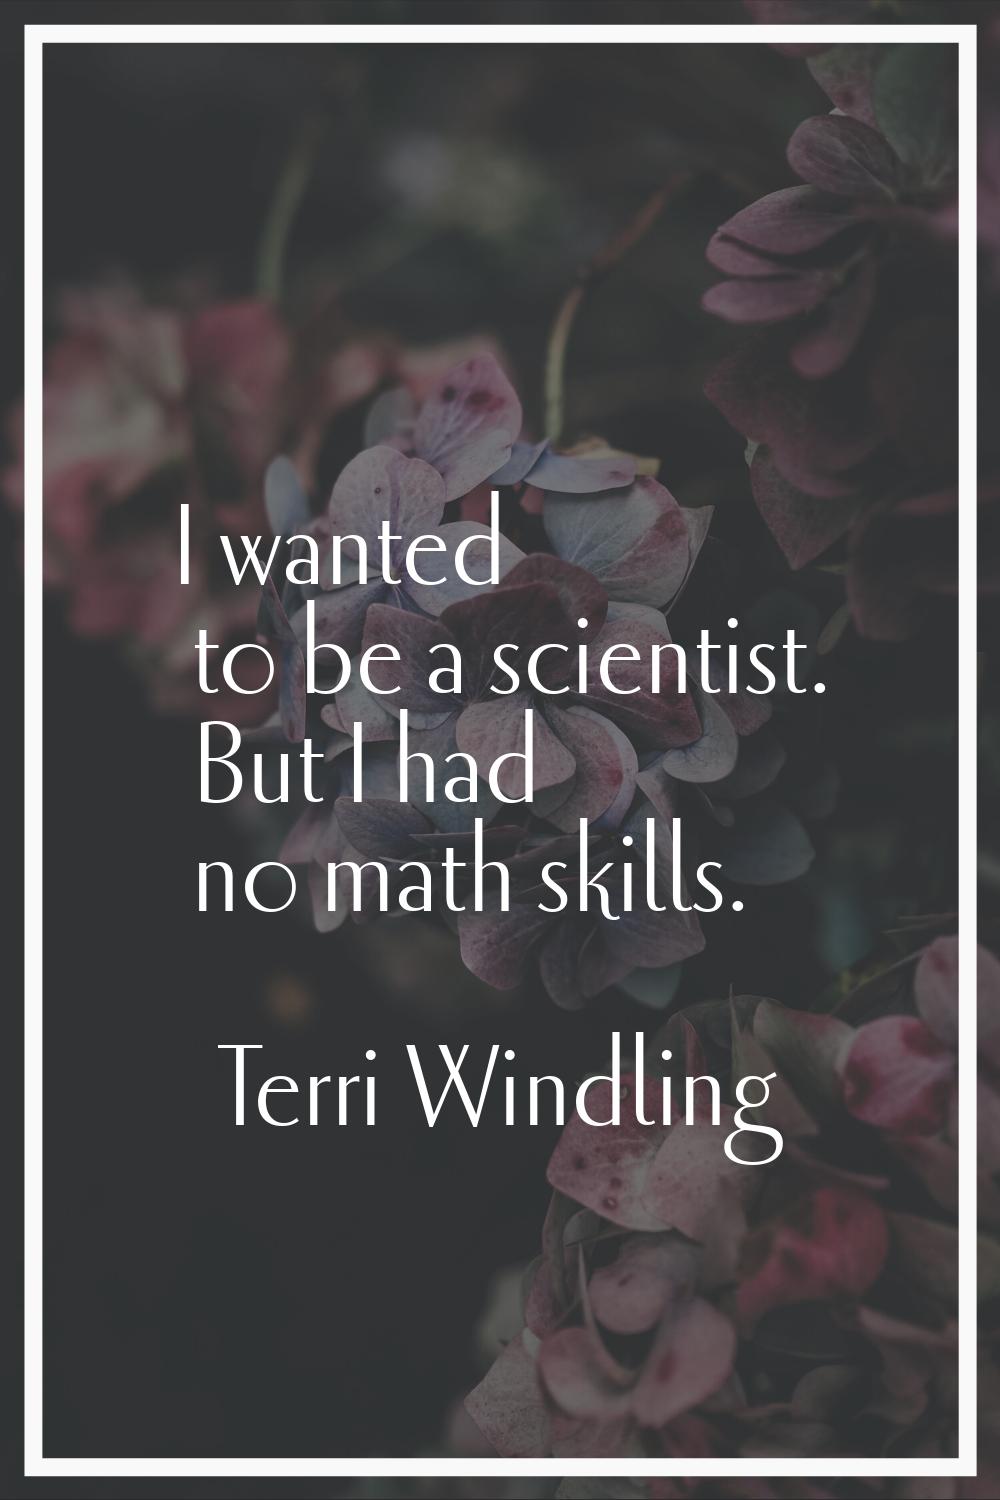 I wanted to be a scientist. But I had no math skills.